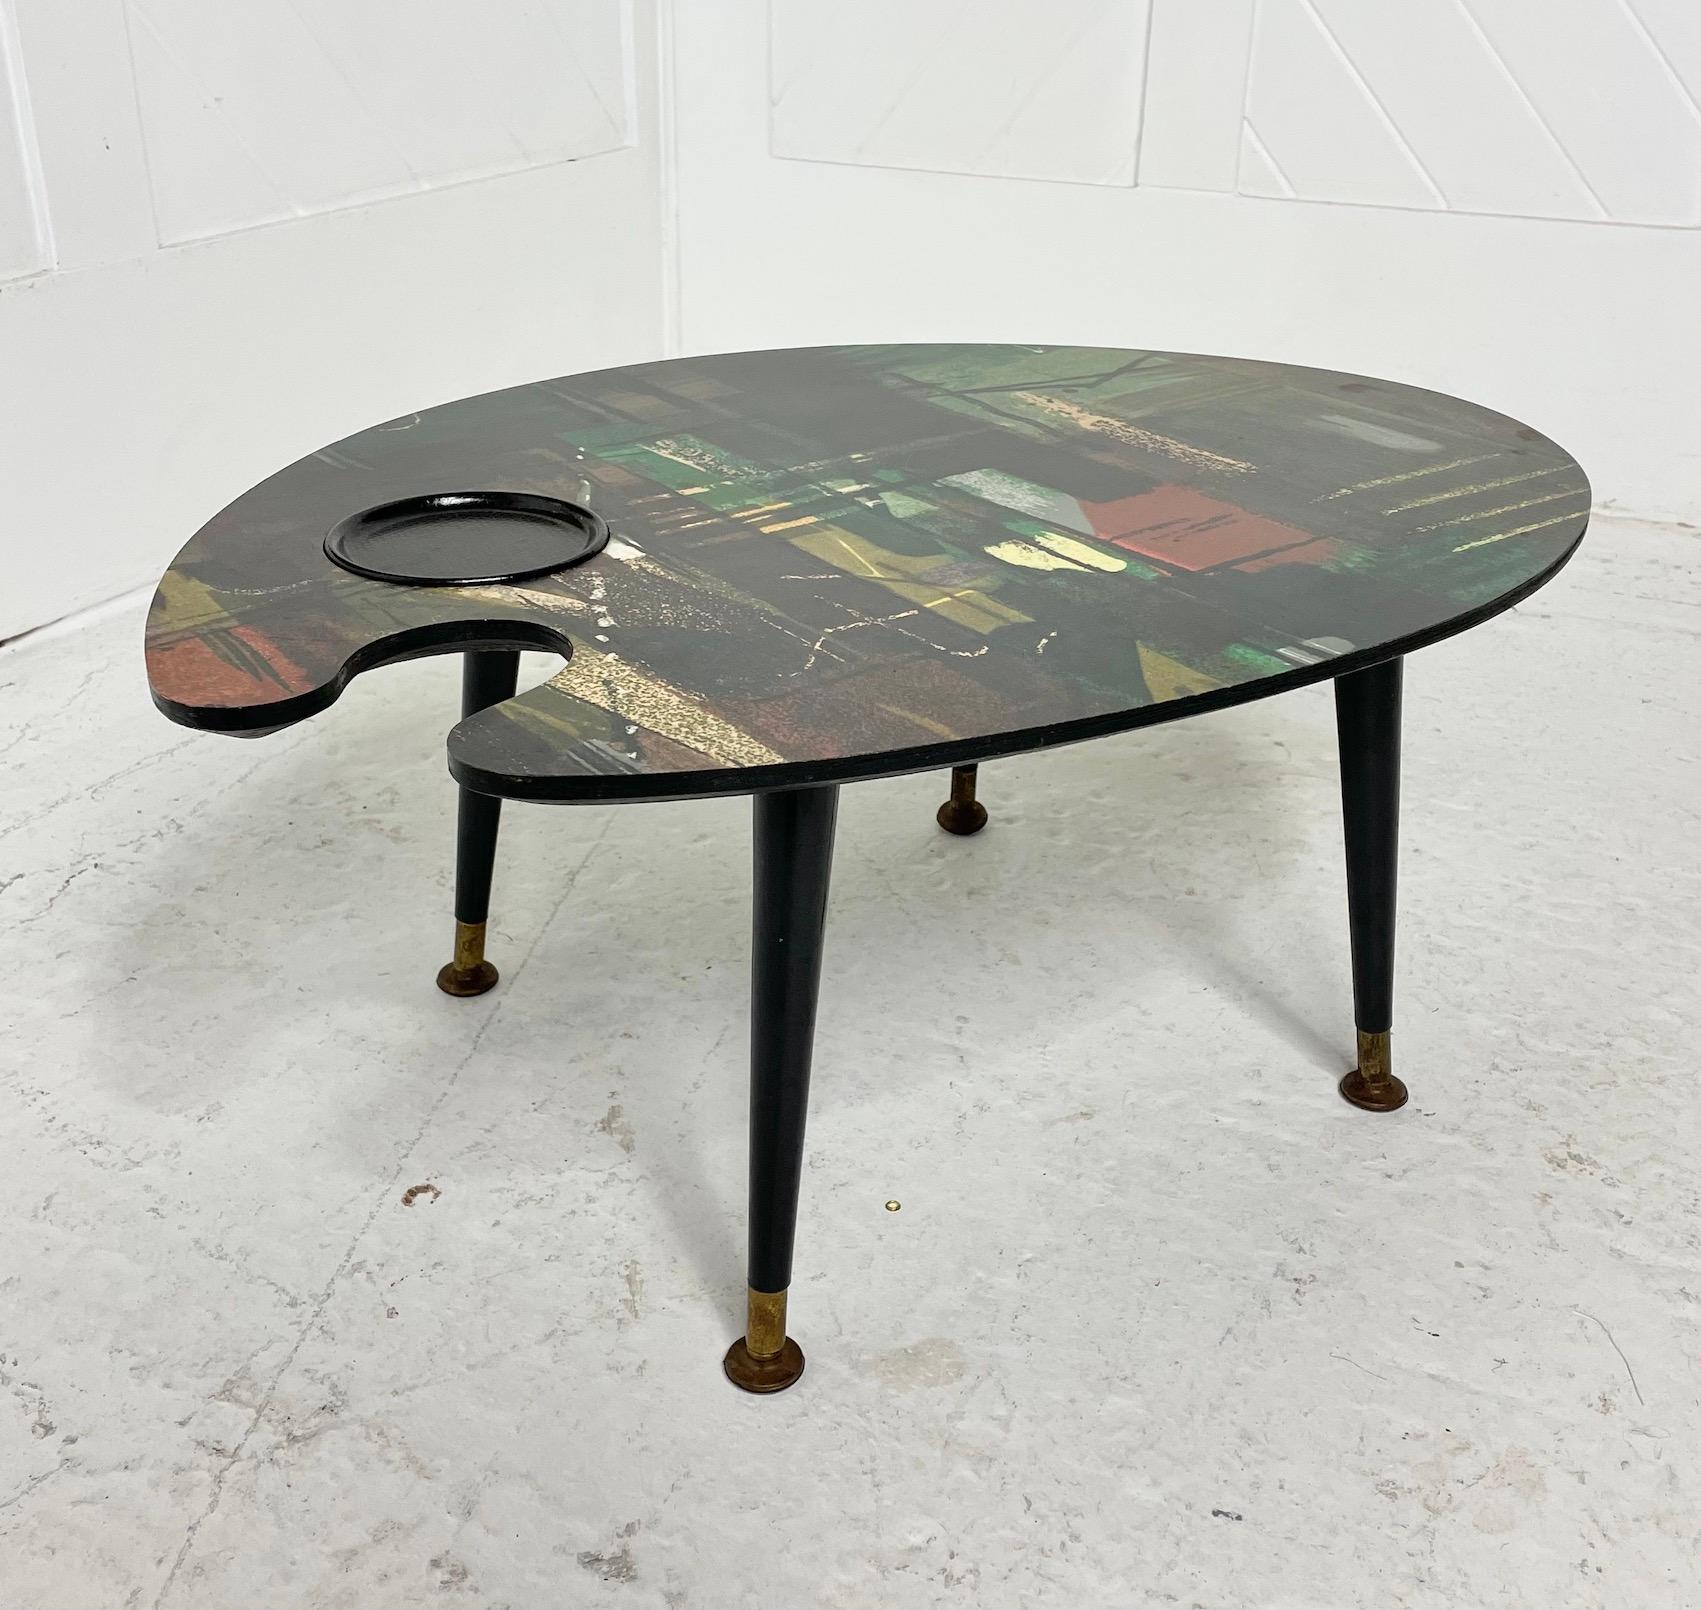 Sixties palette table
Screen printed on a laminate top
After a textile design by John Piper
Circa 1960

This rare palette table has a screen printed top from the textile design 'Stones of Bath' by John Piper for the 1960 Sanderson & Co centenary